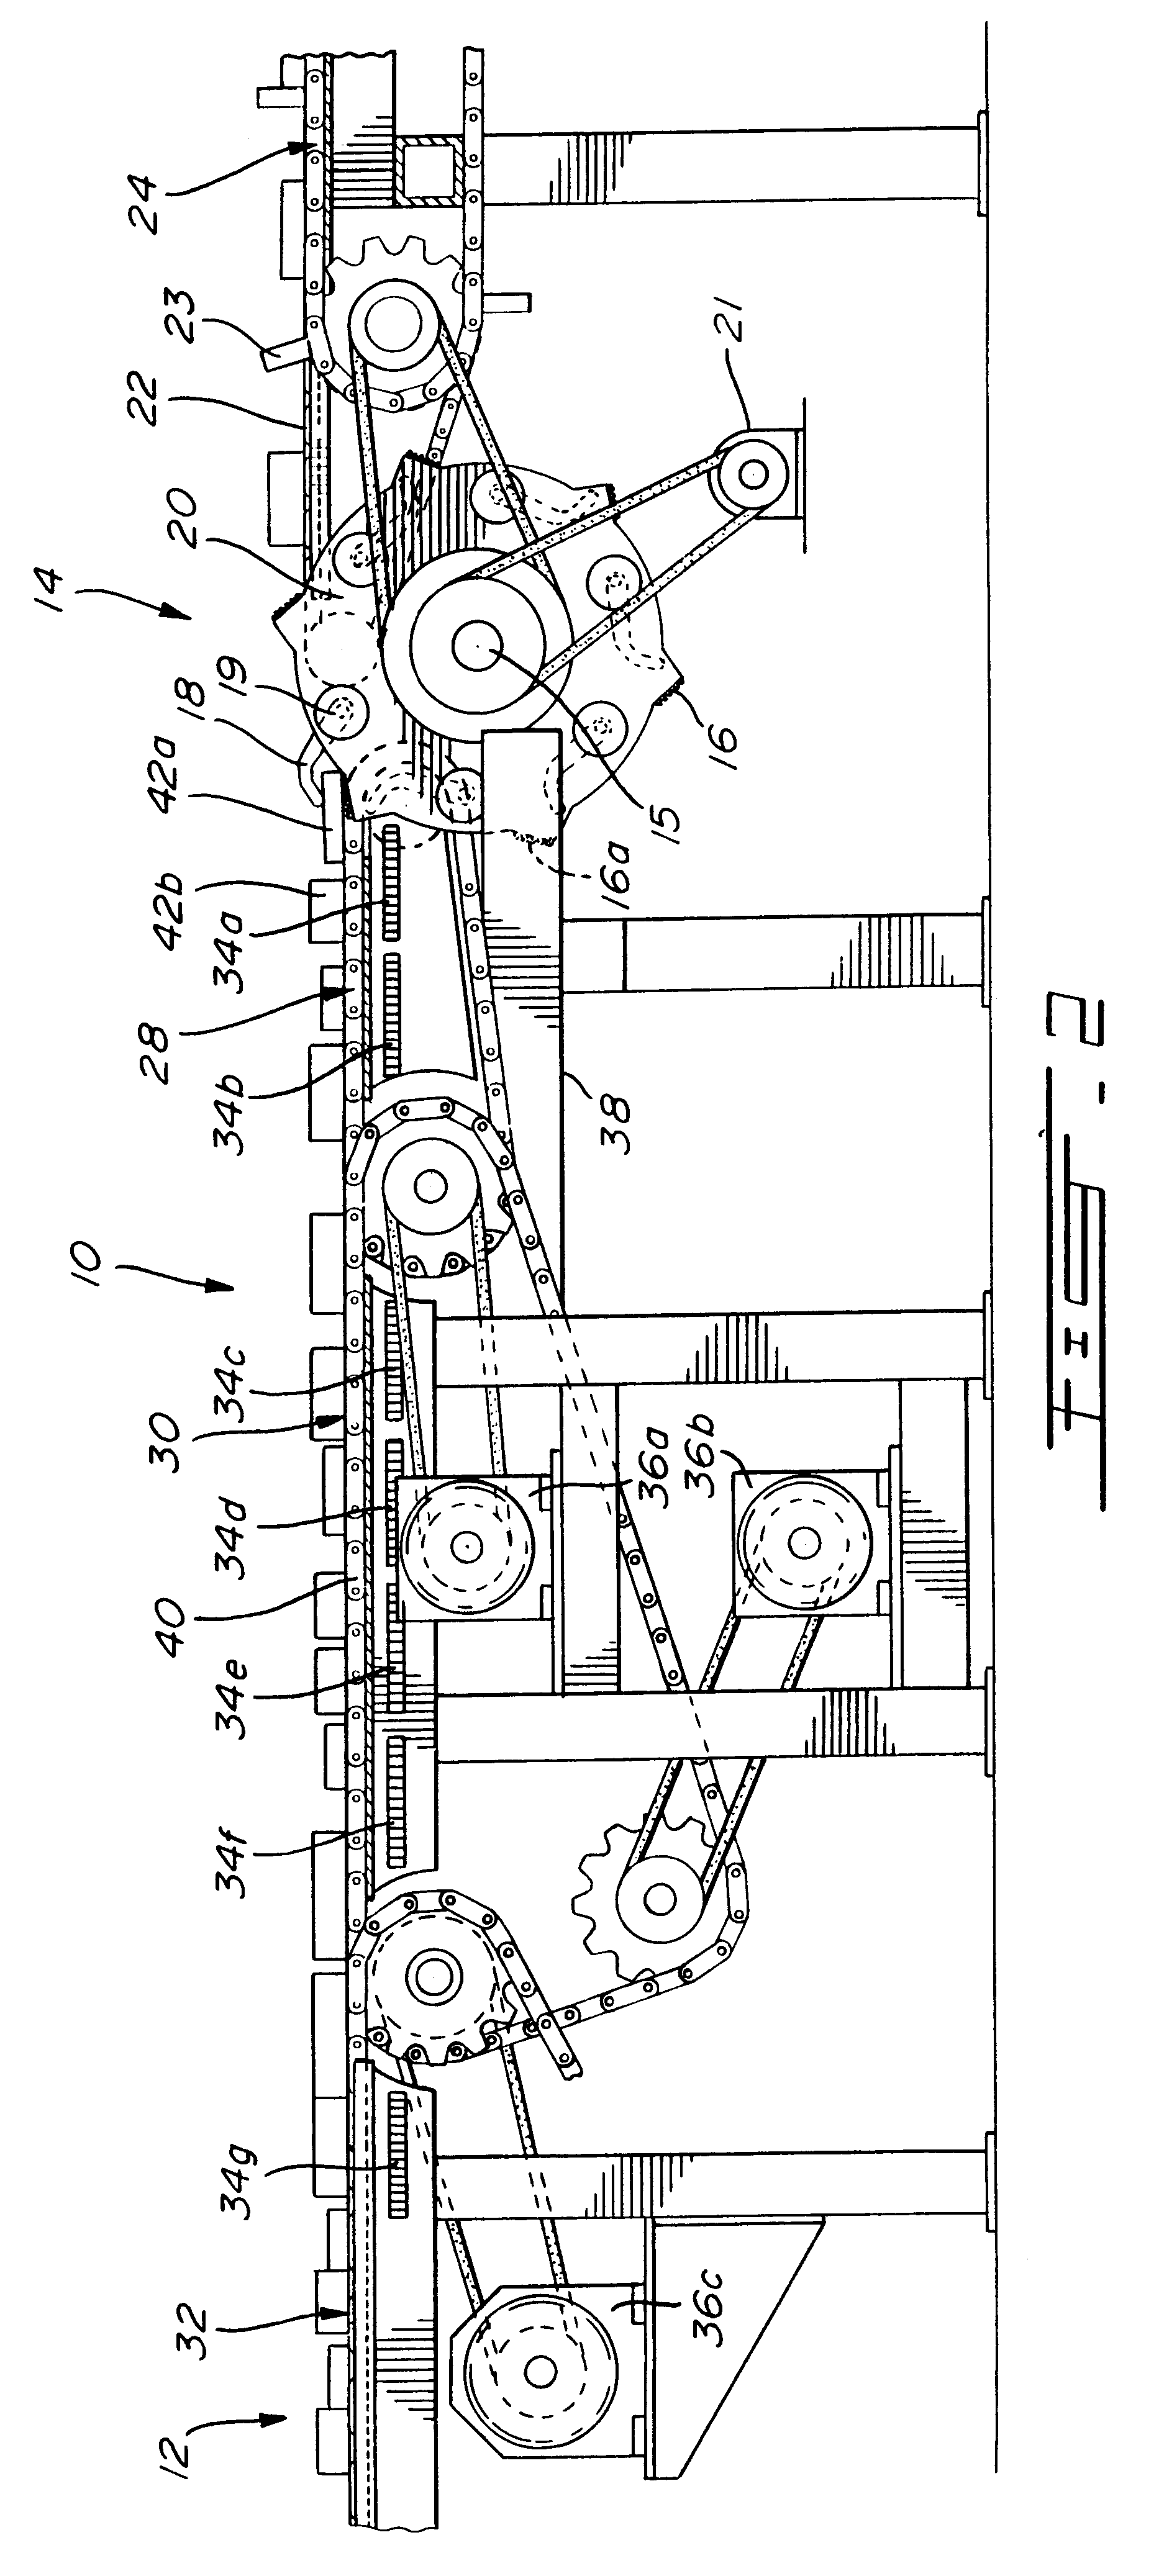 Lumber feed system with load responsive speed modulation